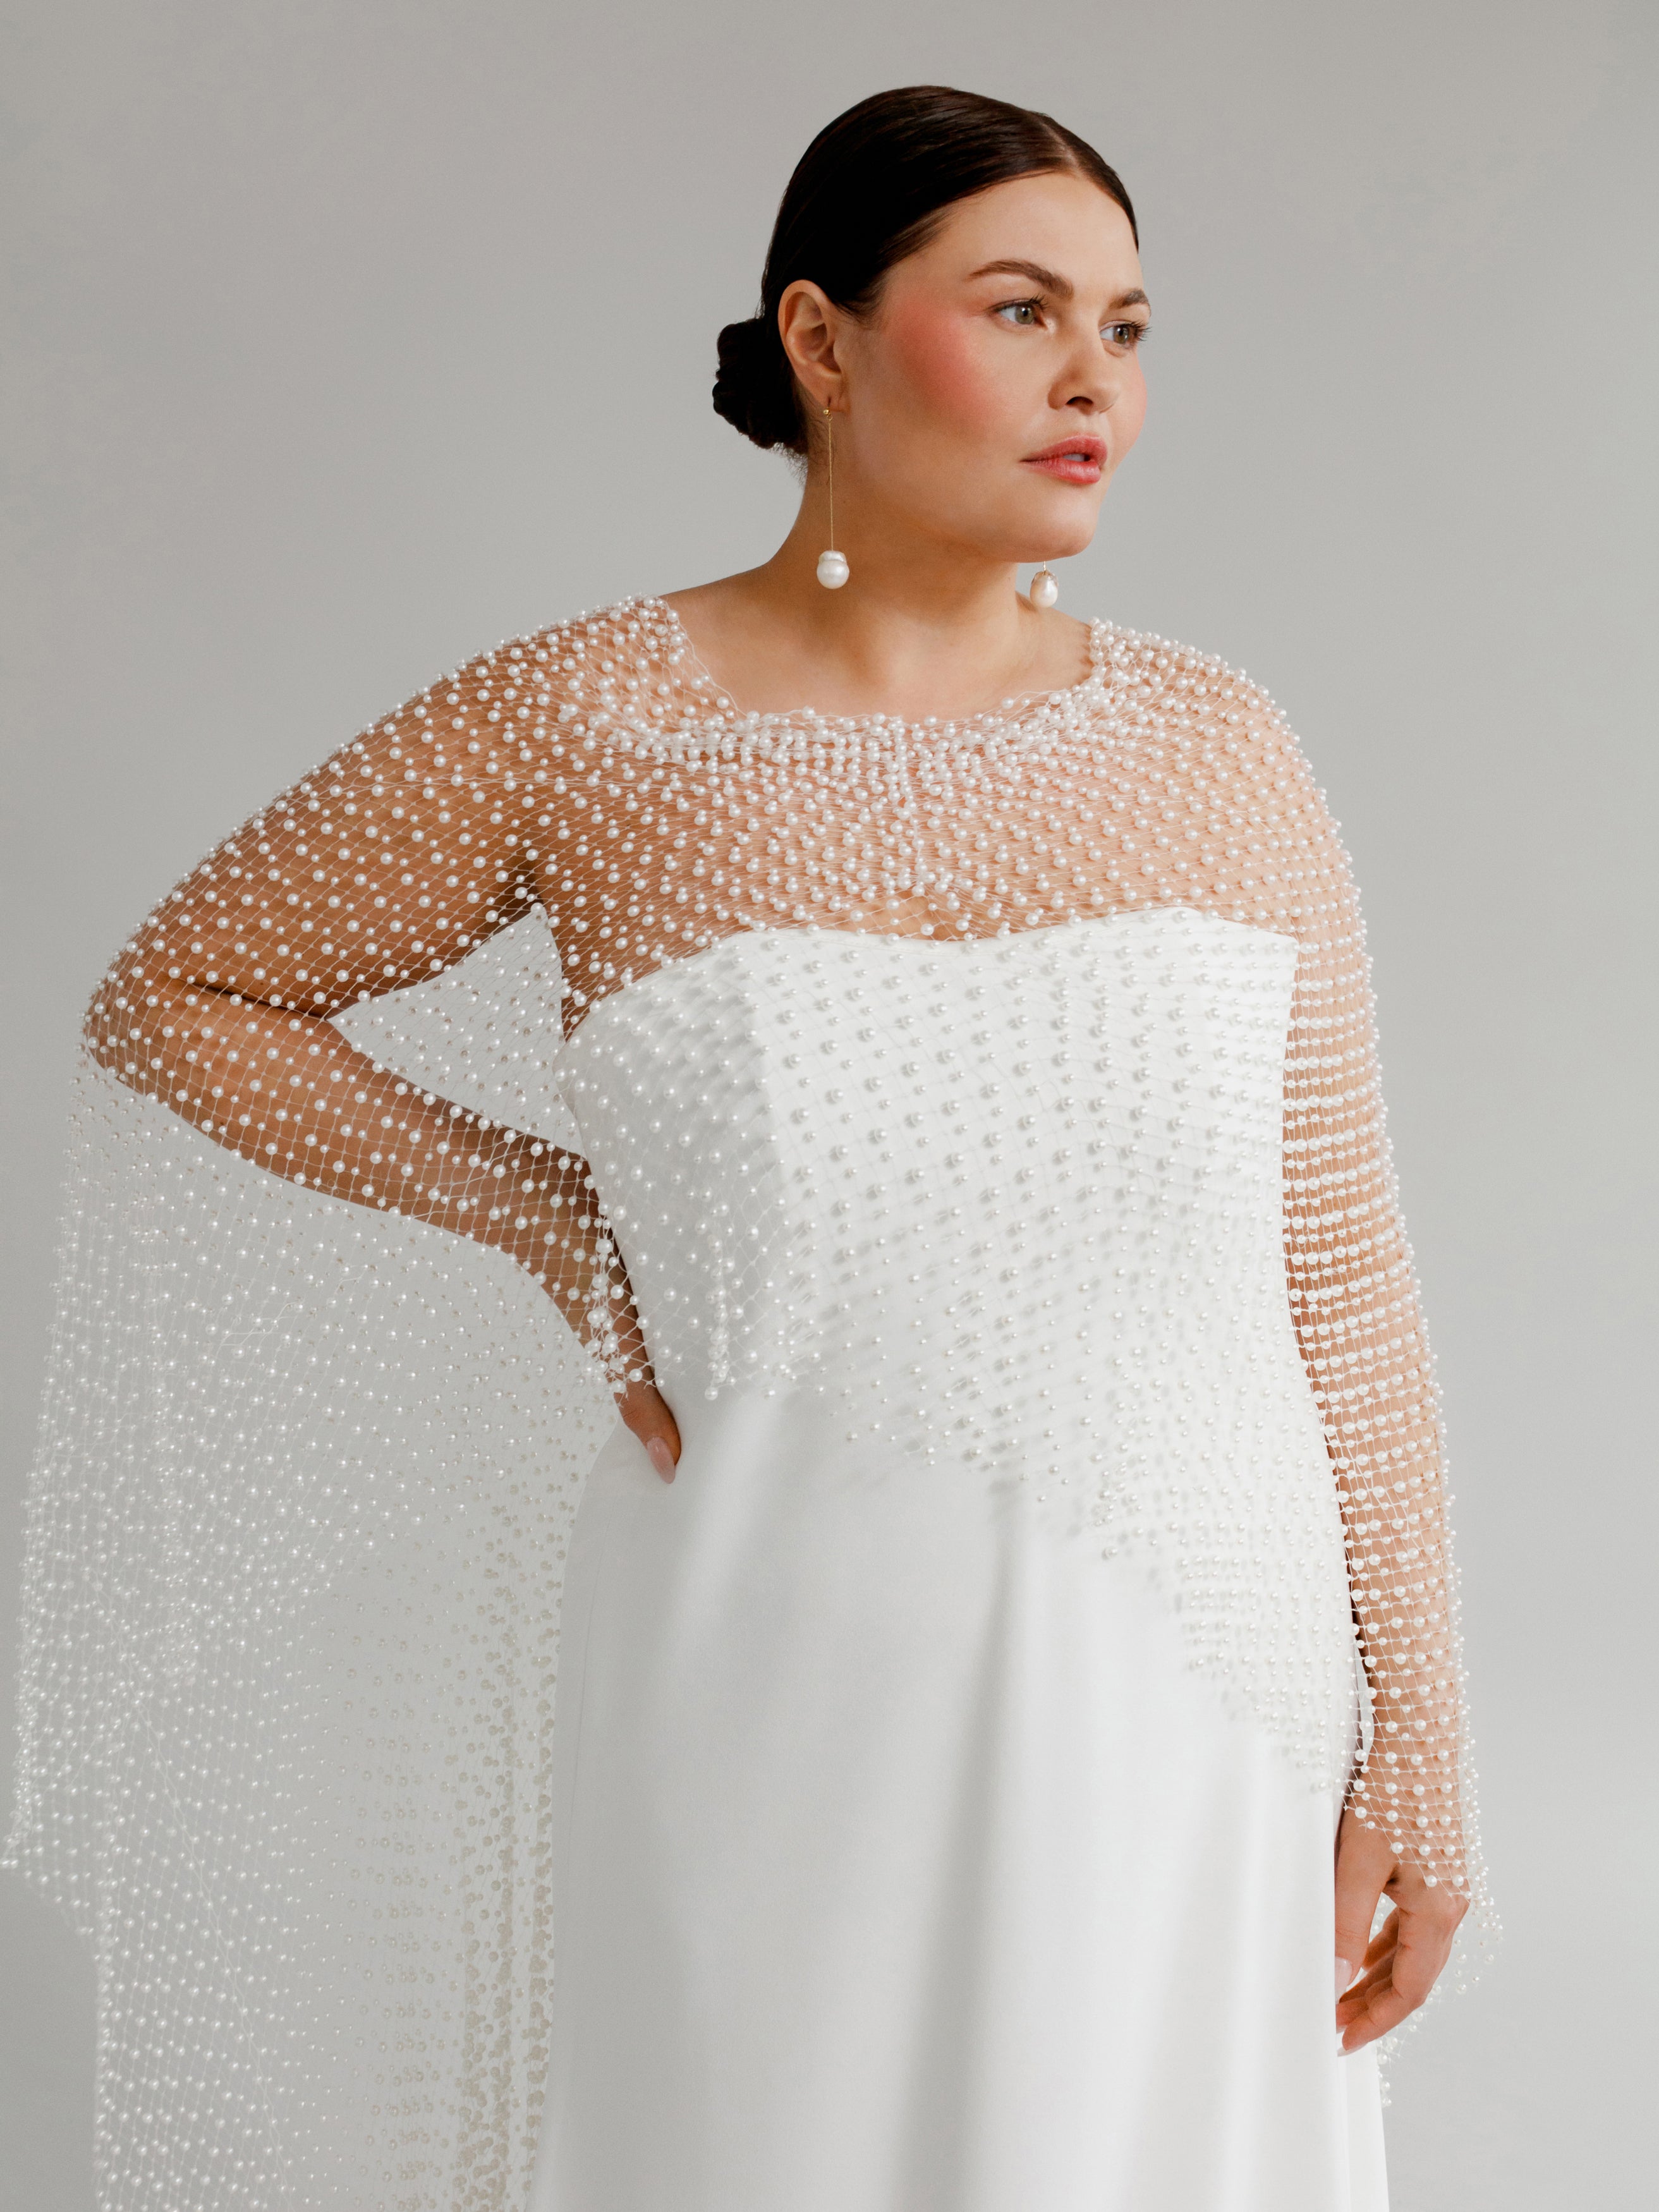 Pearl Cape : A romantic bridal cape made from delicate pearl netting.